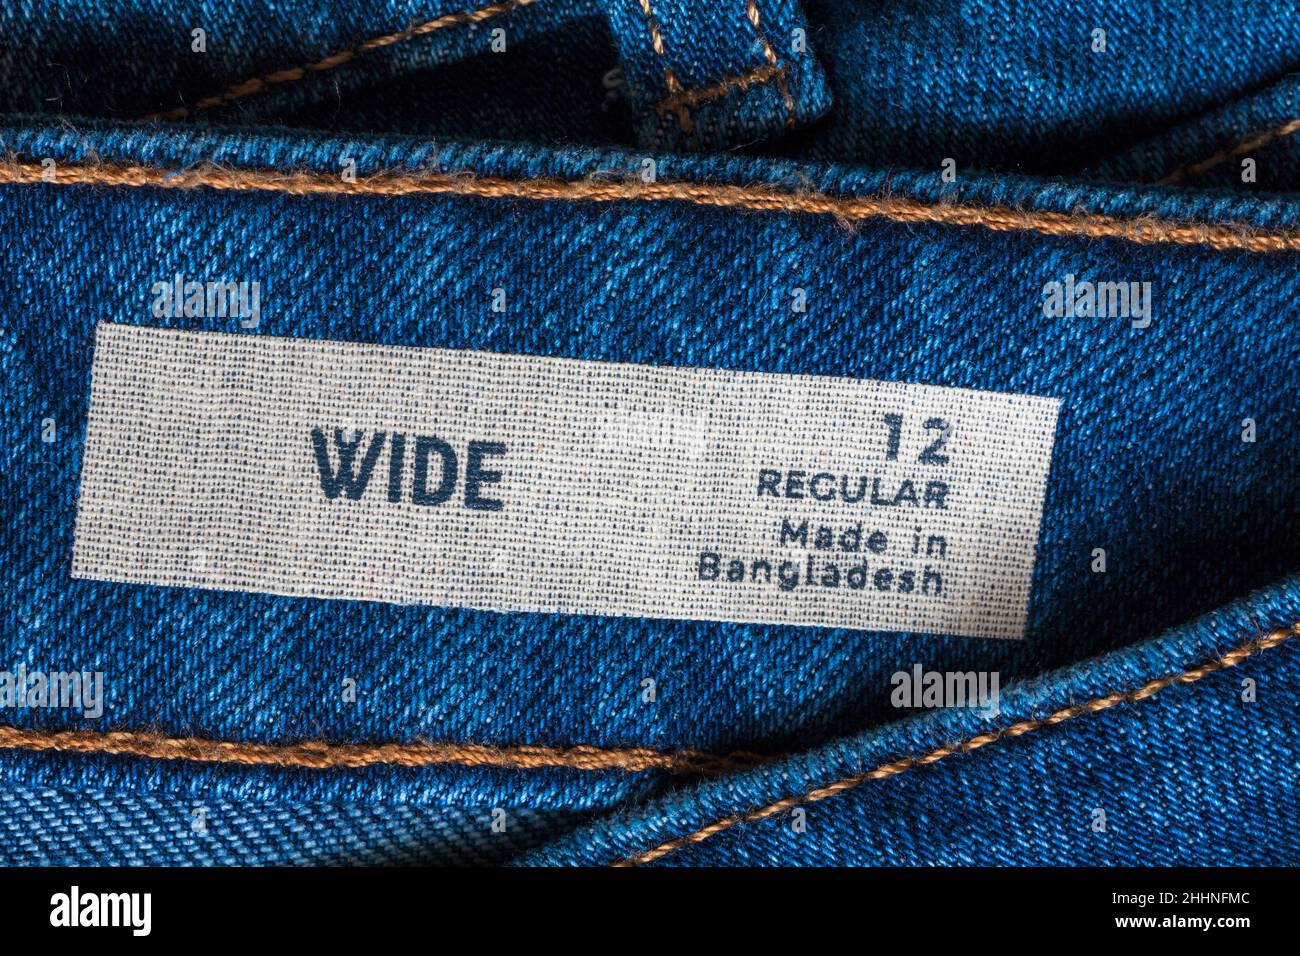 Wide Made in Bangladesh label in regular size 12 M&S denim jeans - sold in  the UK United Kingdom, Great Britain Stock Photo - Alamy